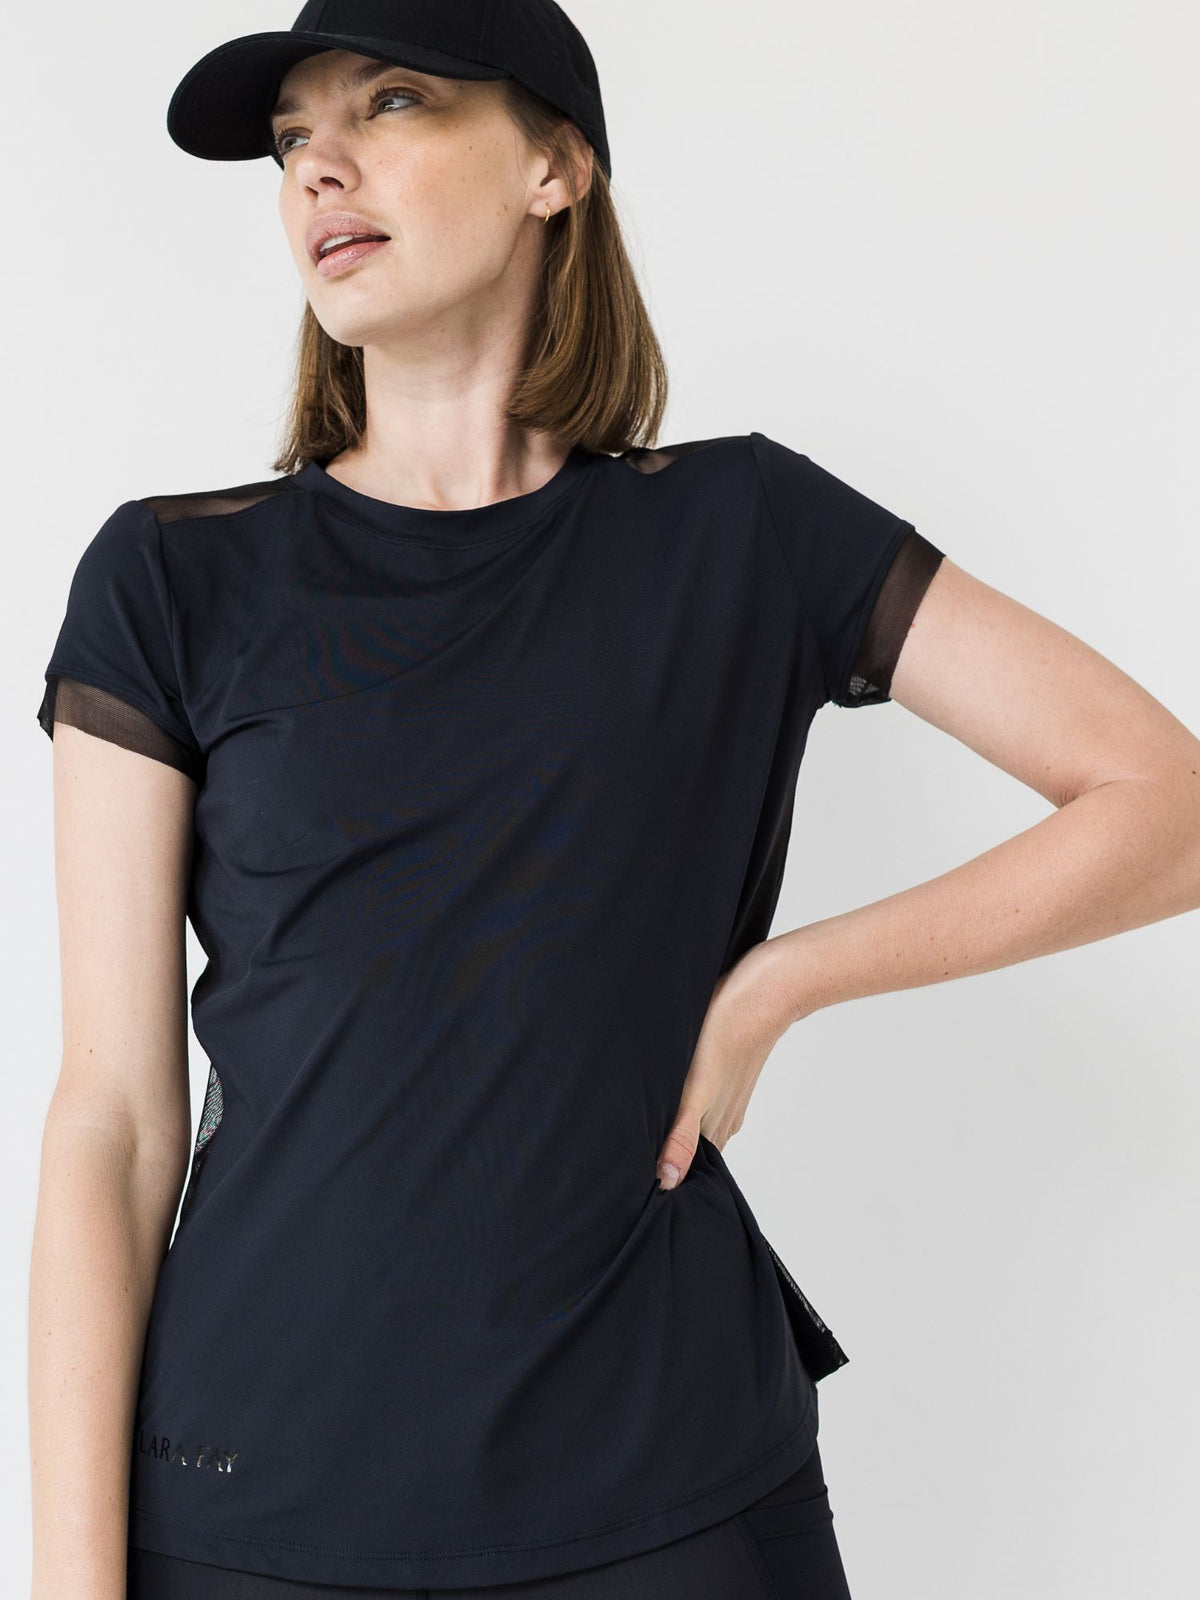 soft black running tee with mesh panels and sleeves